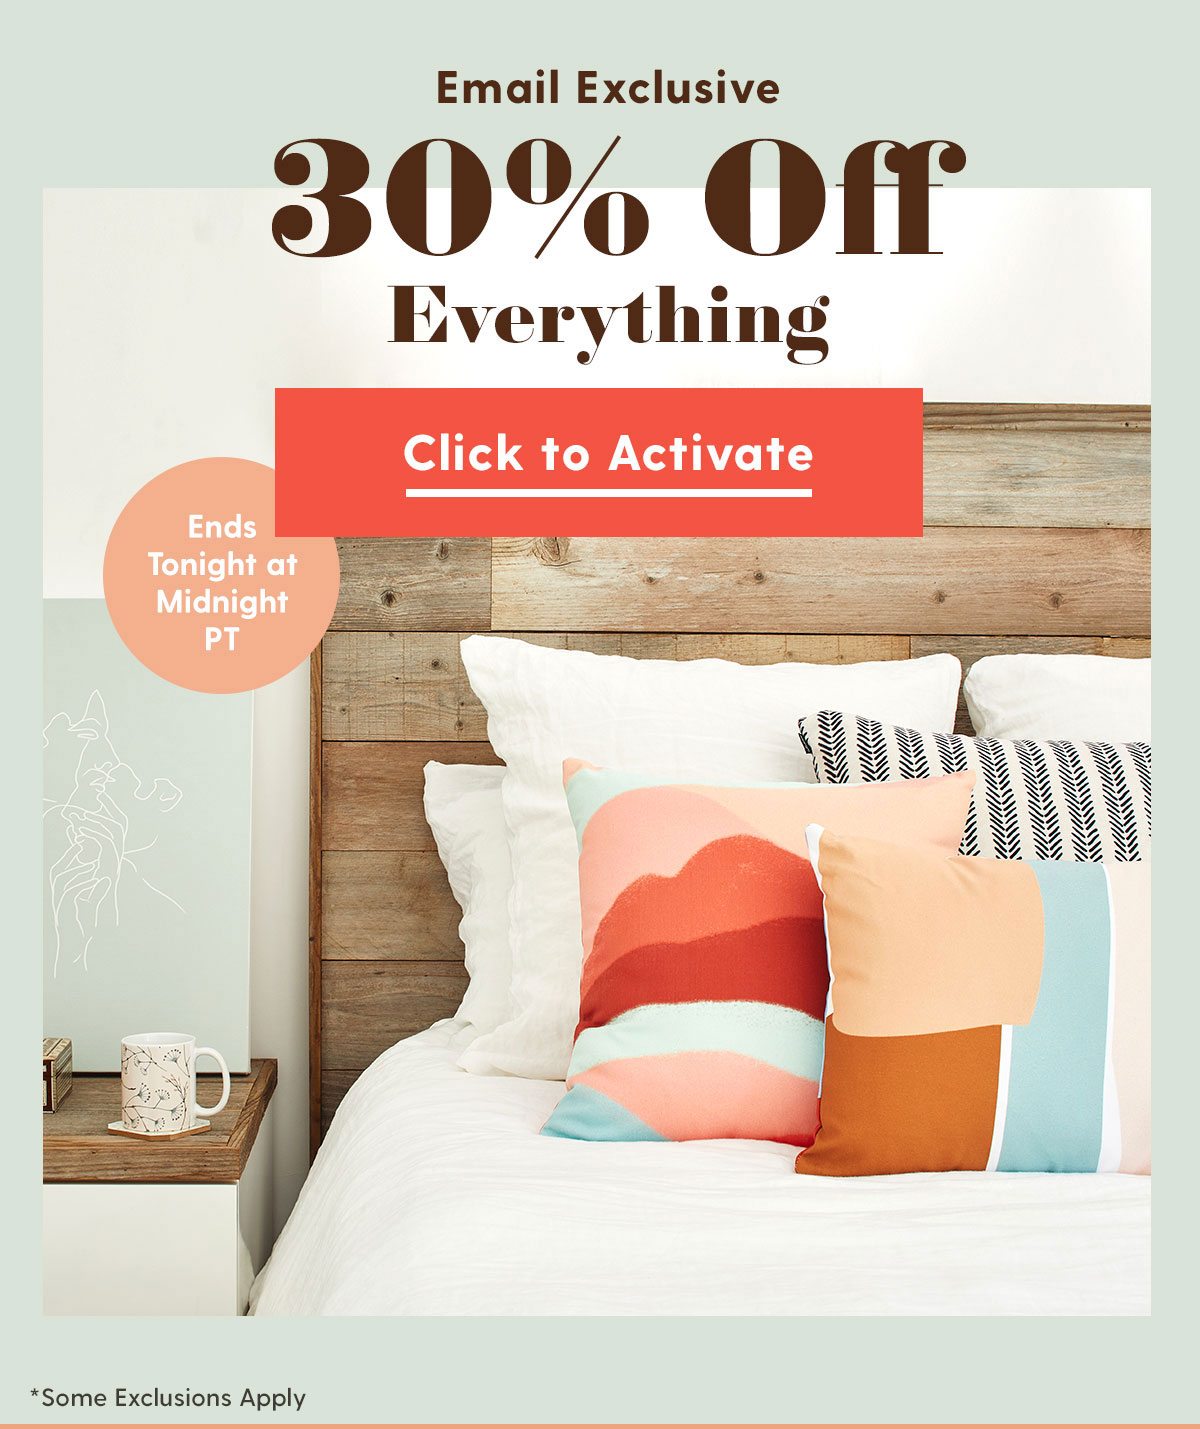 Email Exclusive: 30% Off